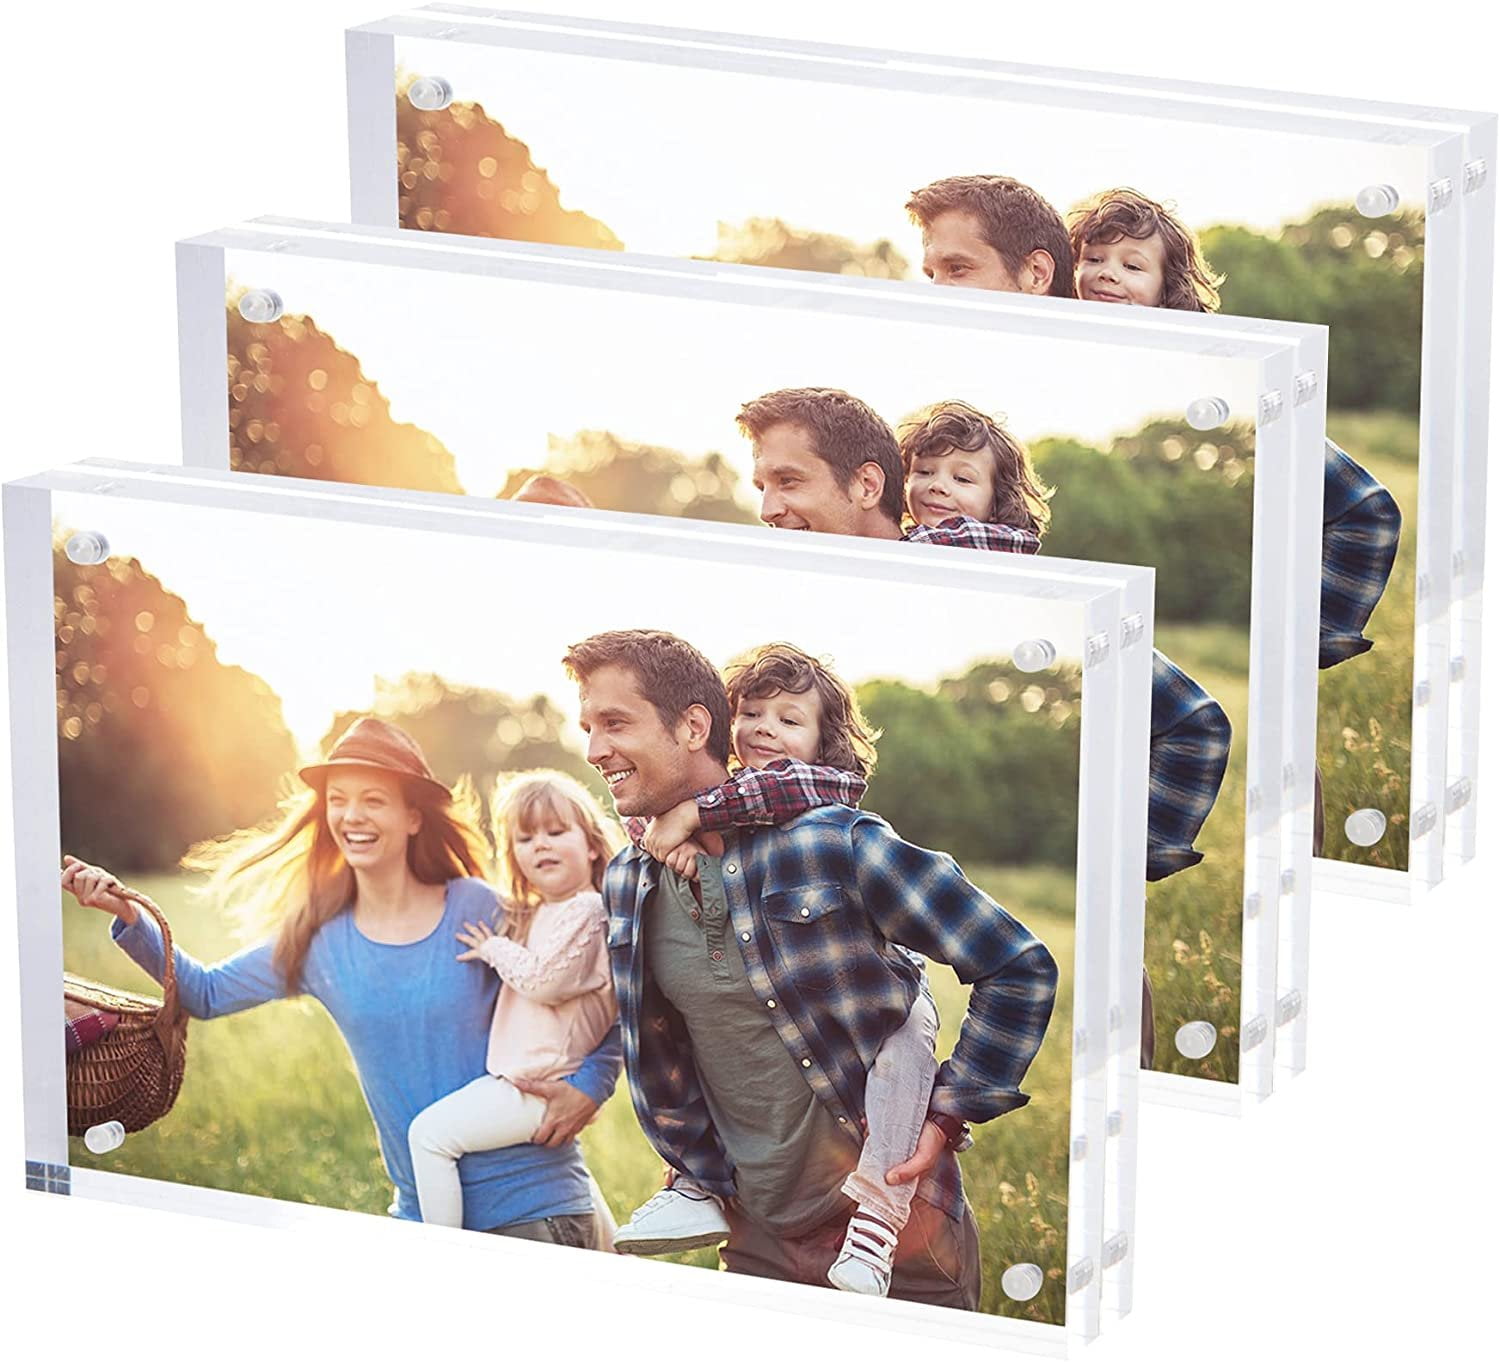 Details about   Freestanding Polished Clear Acrylic Magnetic Picture Photo Frame Stand Display 